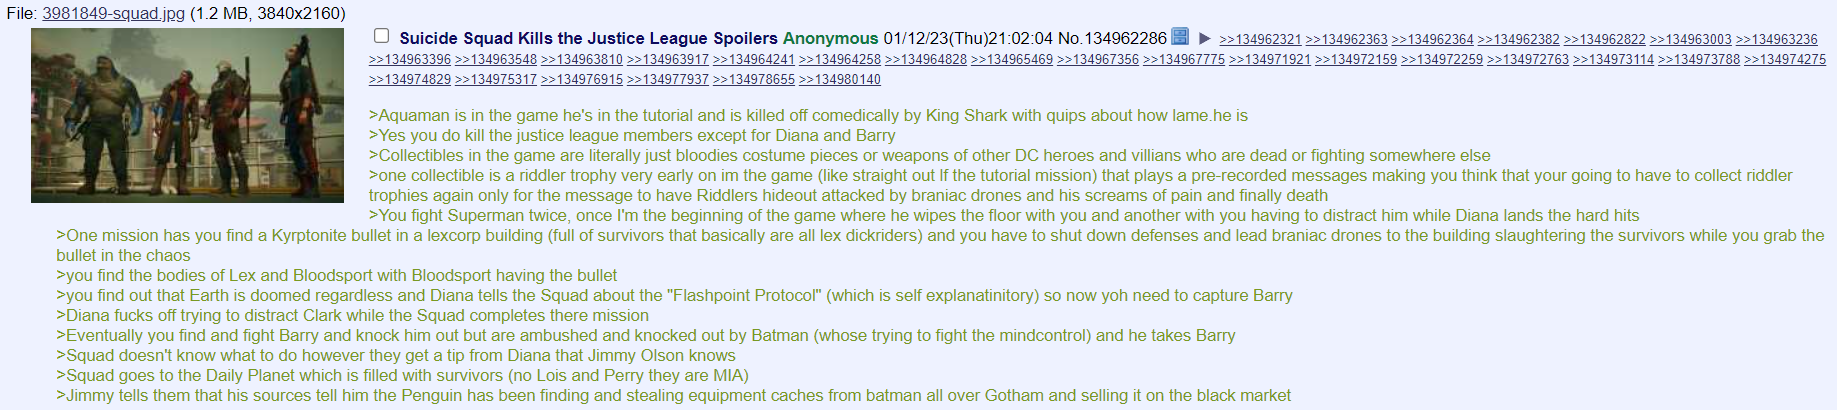 Archive link An alleged summery of Suicide Squad: Kill The Justice League via 4Chan